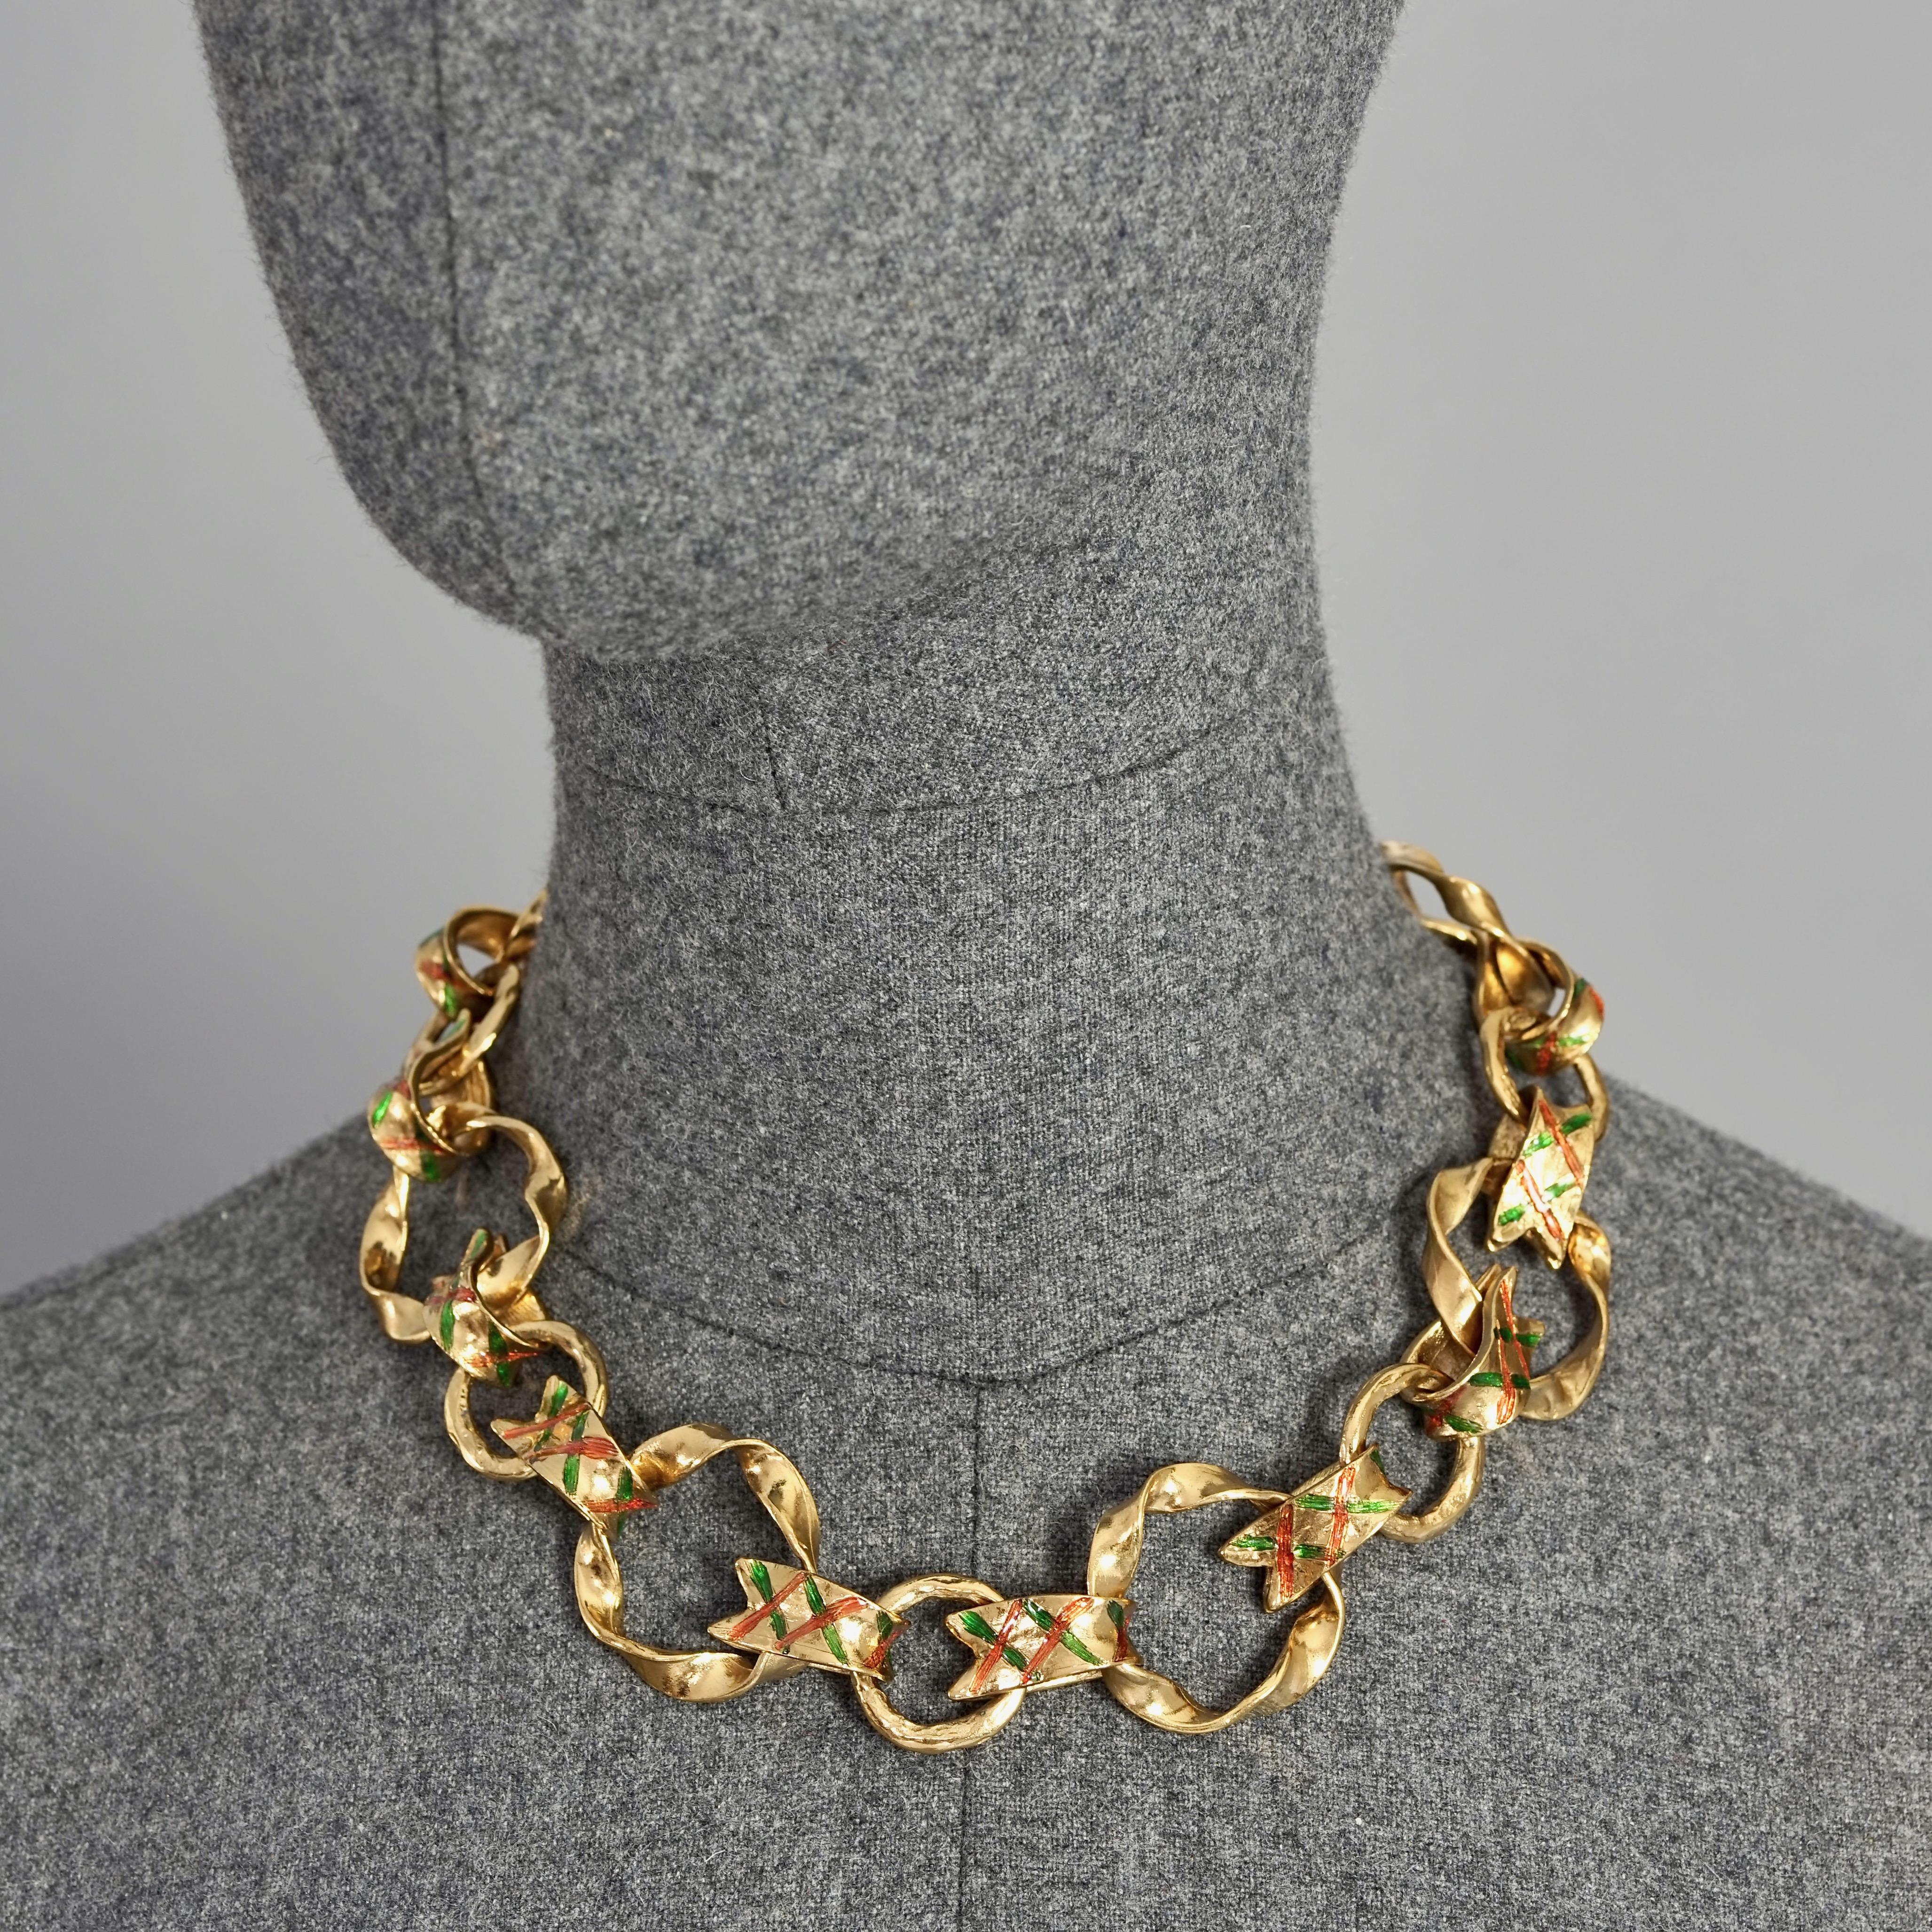 Vintage YVES SAINT LAURENT Ysl Harlequin Enamel Twisted Hoop Link Necklace

Measurements:
Height: 1.30 inches (3.3 cm)
Wearable Length : 17.51 inches to 19.29 inches (44.5 cm to 49 cm)

Features:
- 100% Authentic YVES SAINT LAURENT.
- Twisted hoop